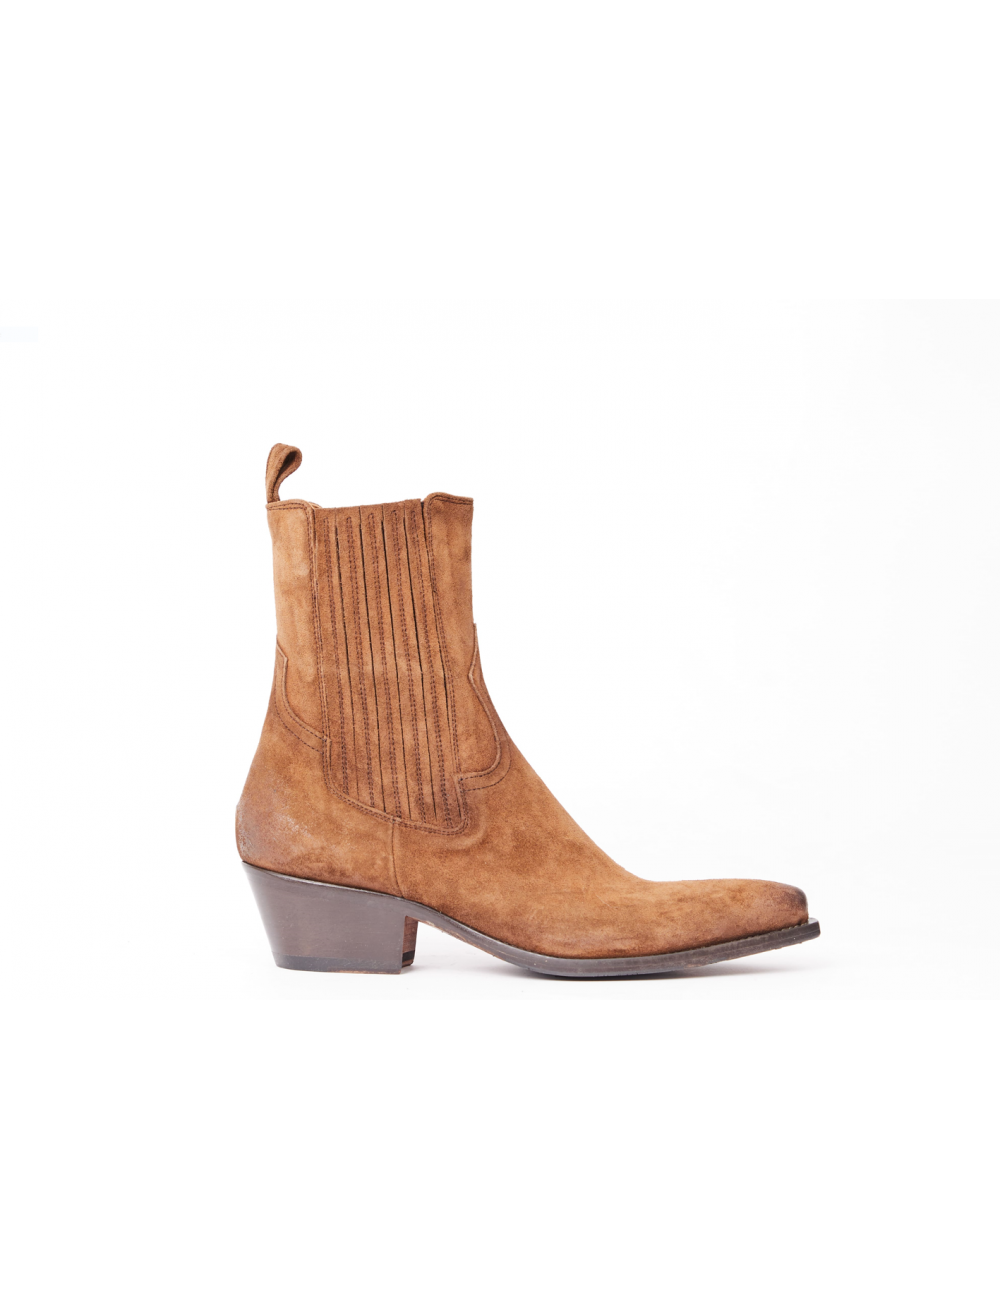 tiag women's boot in whisky...